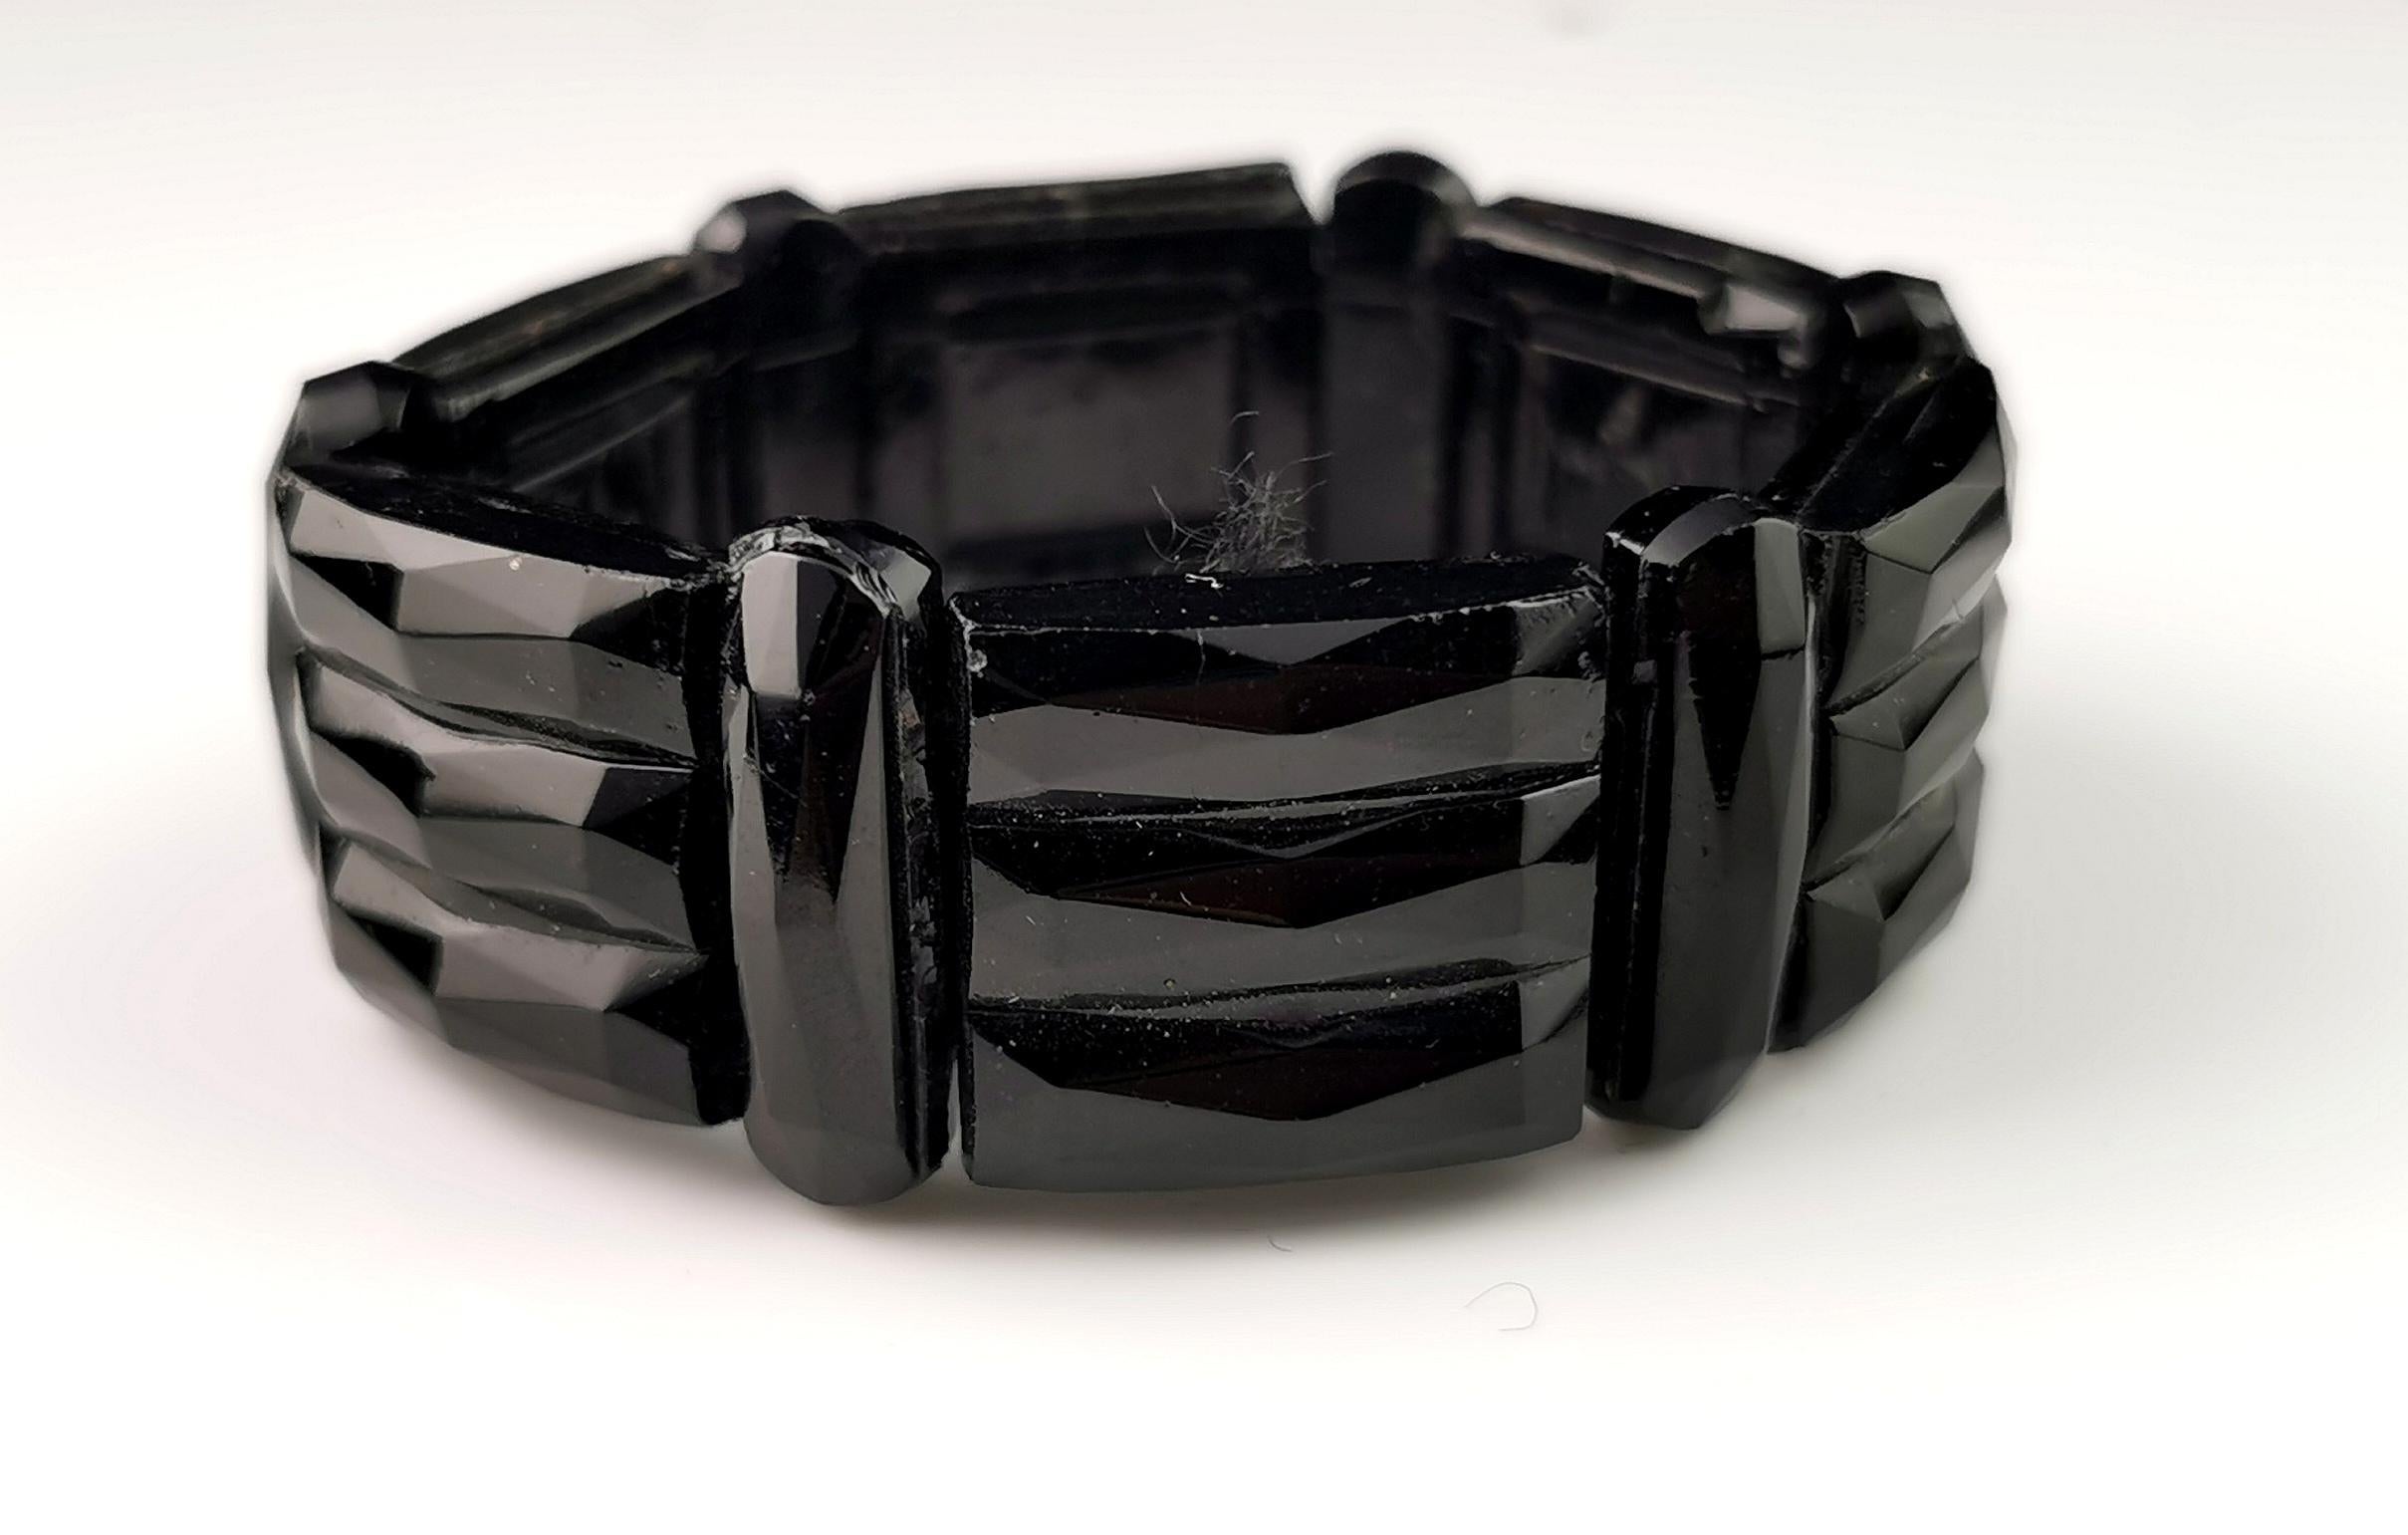 A gorgeous antique Victorian era French jet bracelet.

Carved and engraved panels of rich shiny black French jet are strung onto an elastic thread.

It is a bangle type bracelet and it does have some stretch to it being on elastic.

French jet is